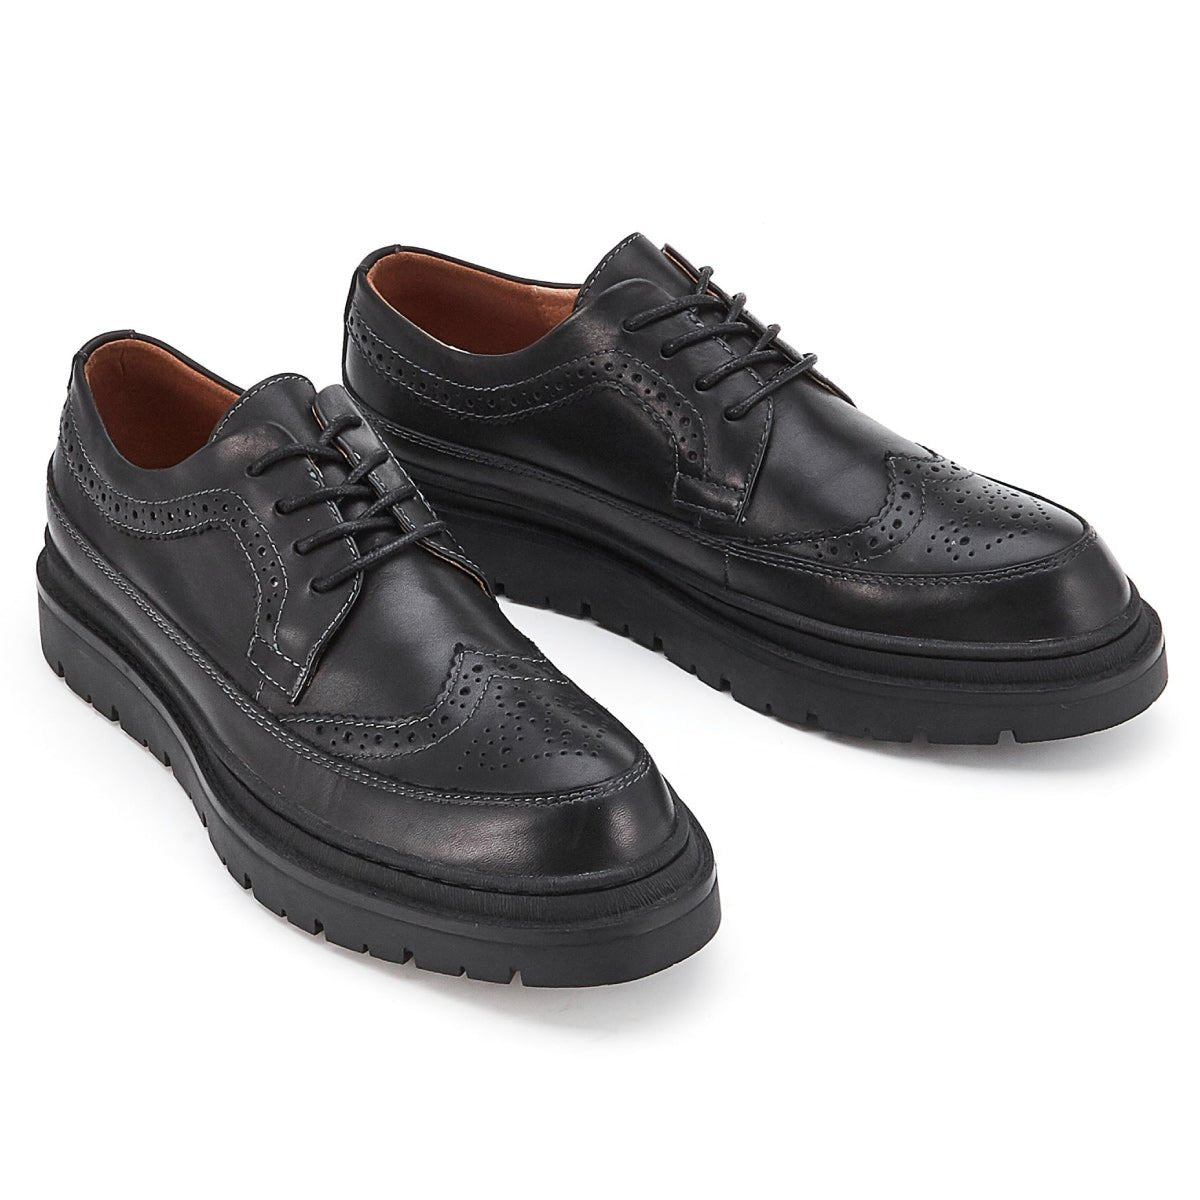 Full Scene Punch Hole Detailed Brogue Lace Up Black Leather Shoes - 0cm